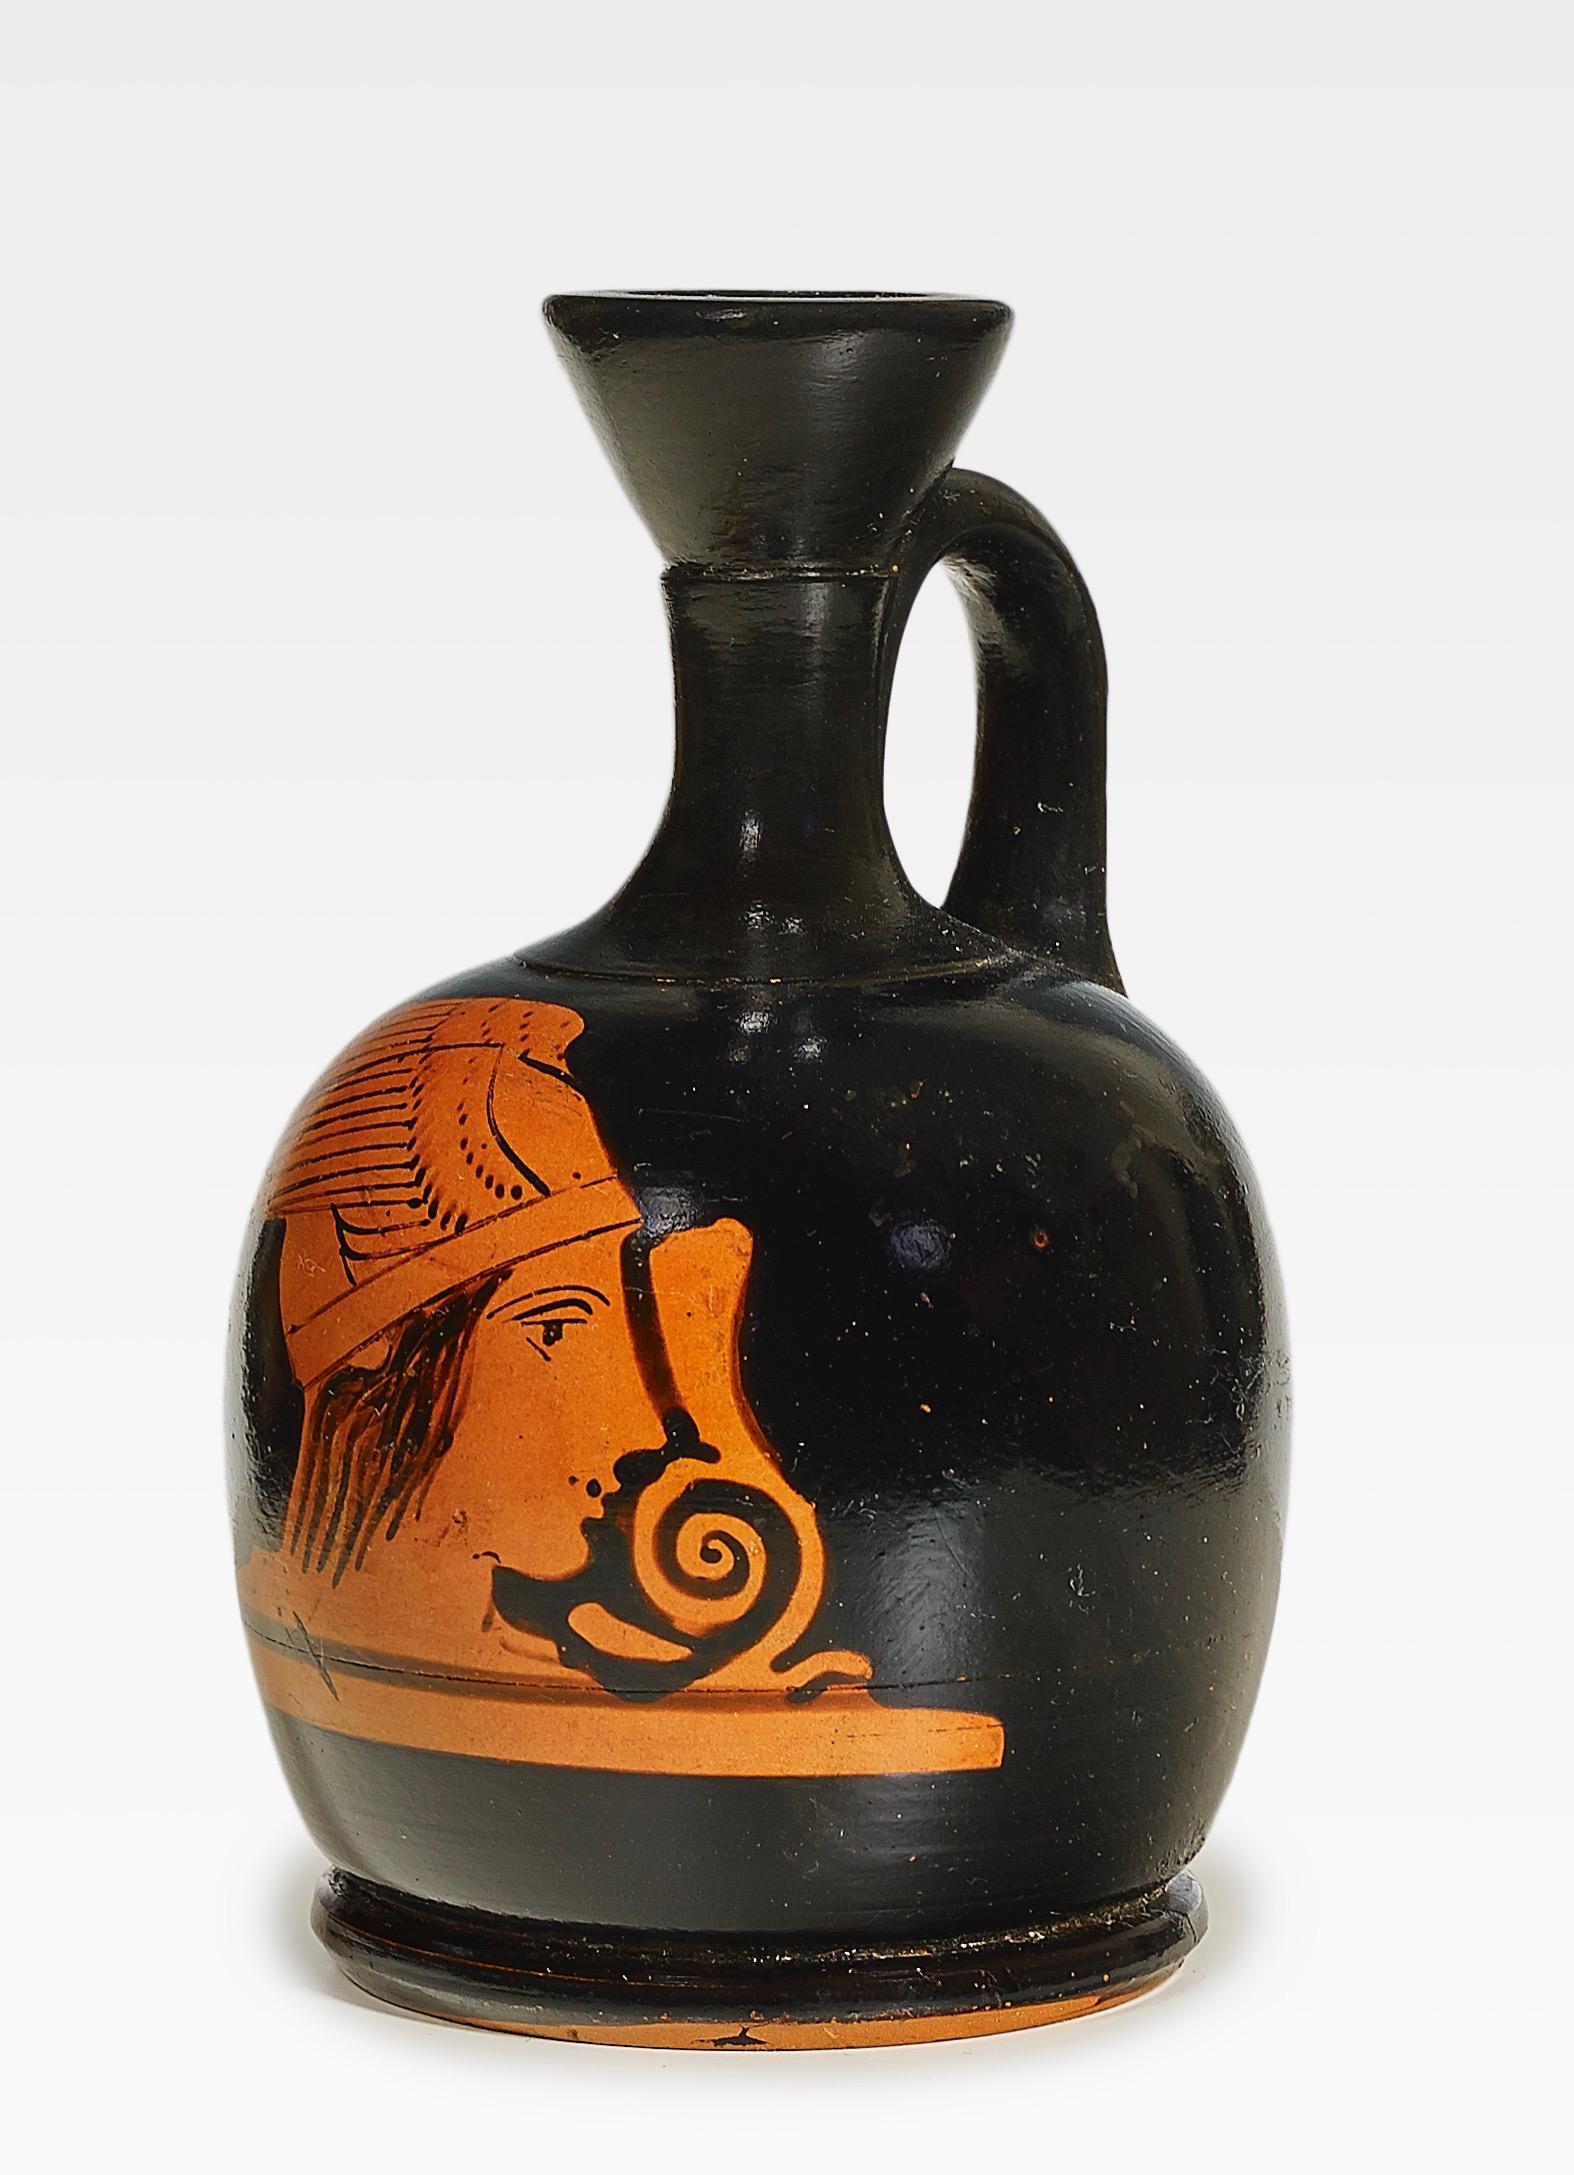 Attic red figure squat-lekythos depicting the head of Hermes. Athens, mid-5th century BC. Neck, orifice and handle professionally restored. This is very common for Greek vases and has no influence on its value. Almost all vases in museums are